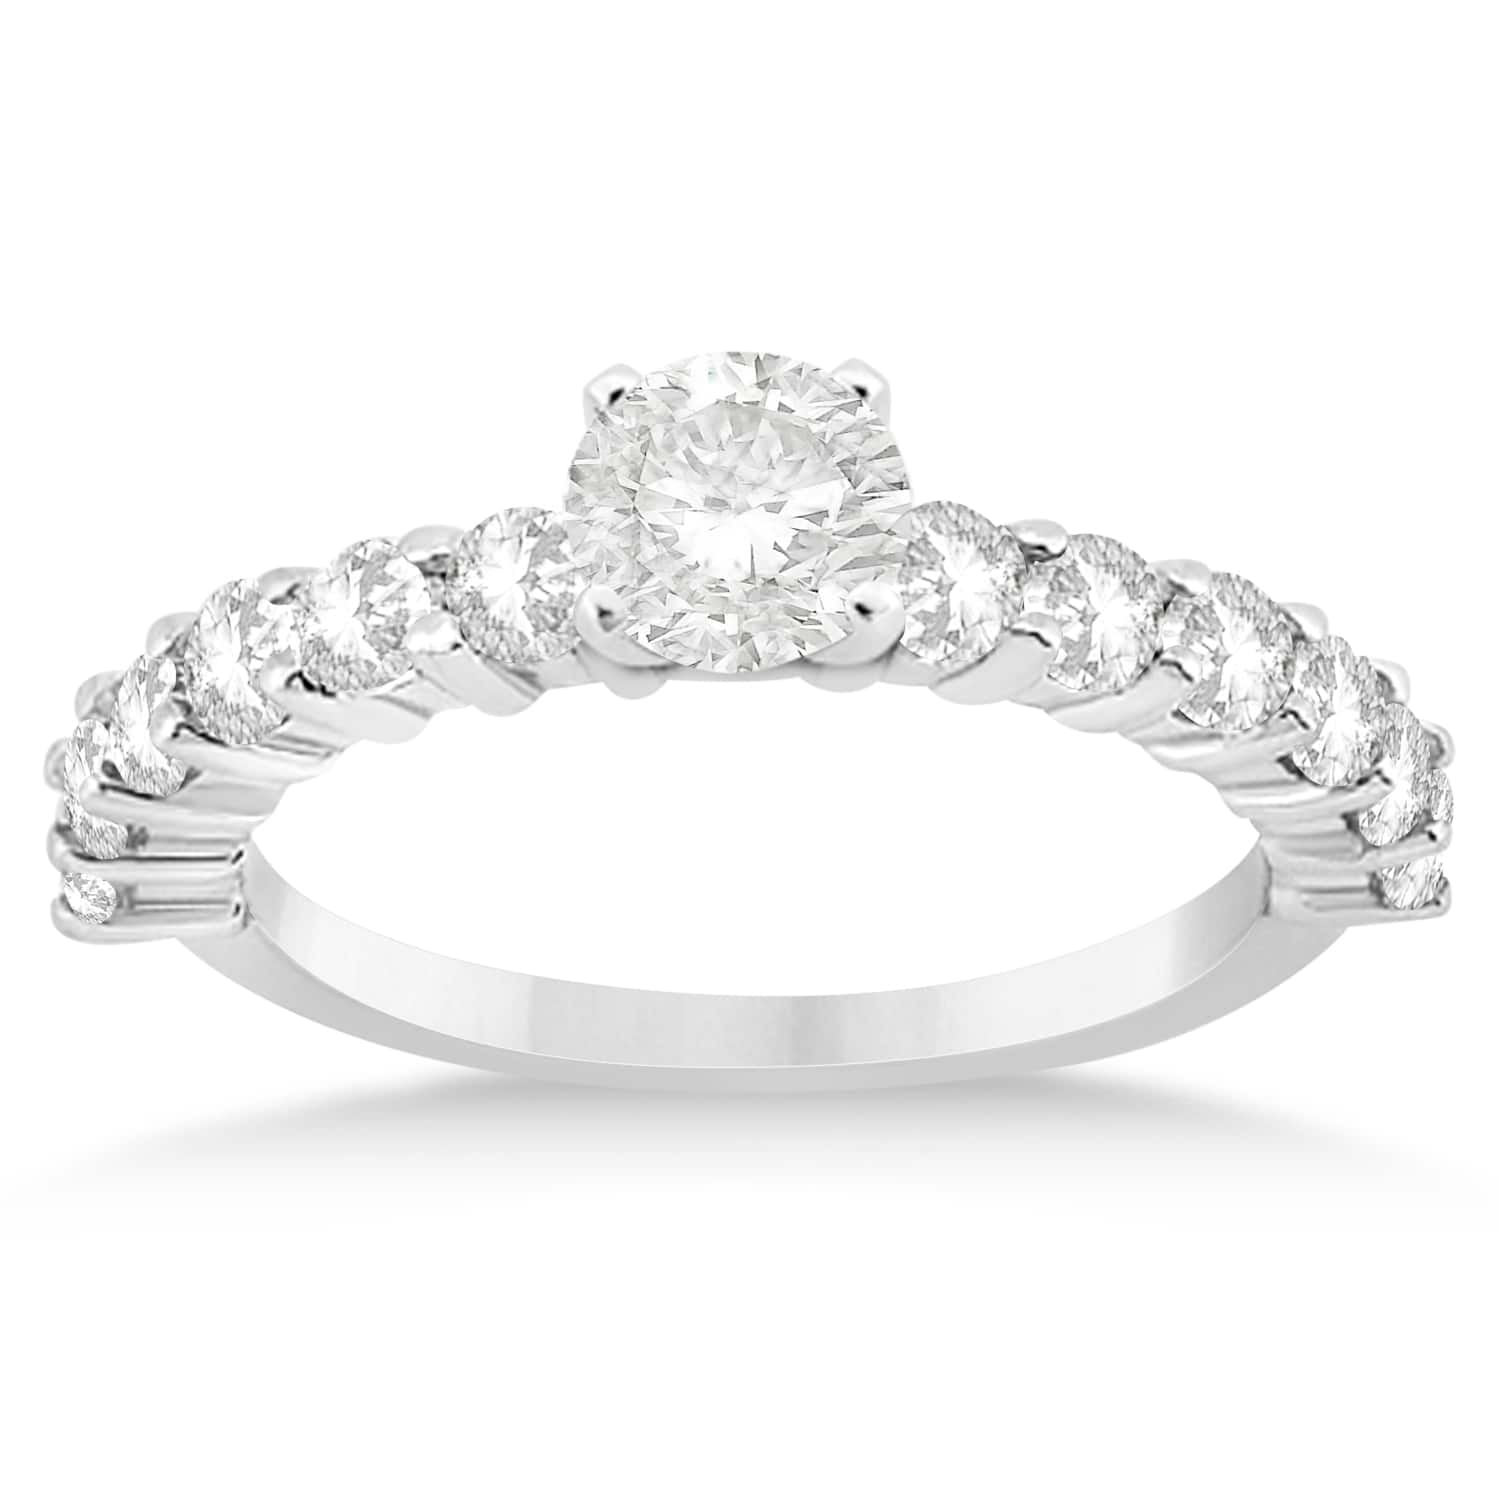 Diamond Accented Engagement Ring Setting 18k White Gold 0.84ct